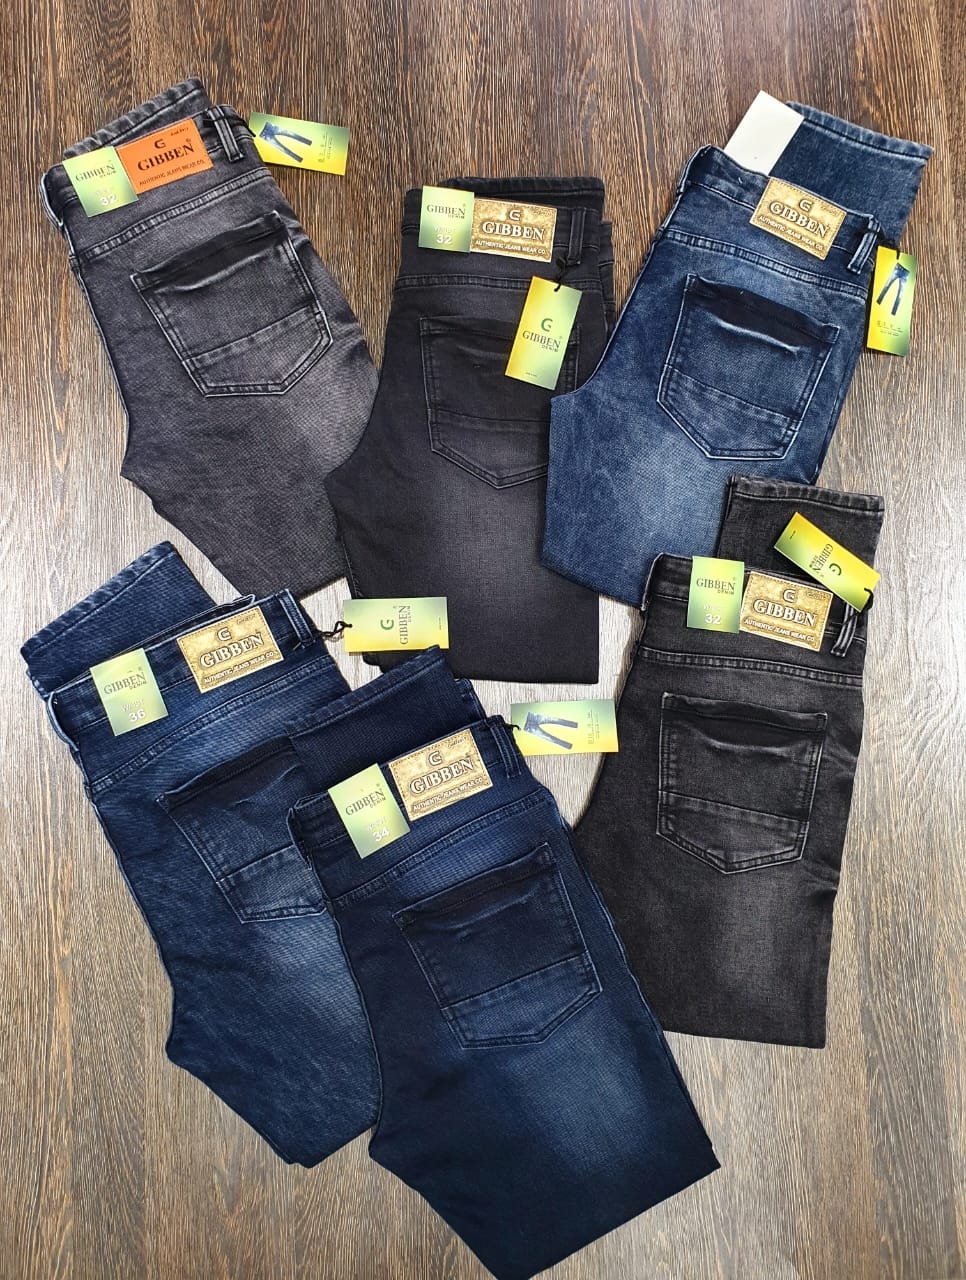 Share 182+ jeans pant combo latest